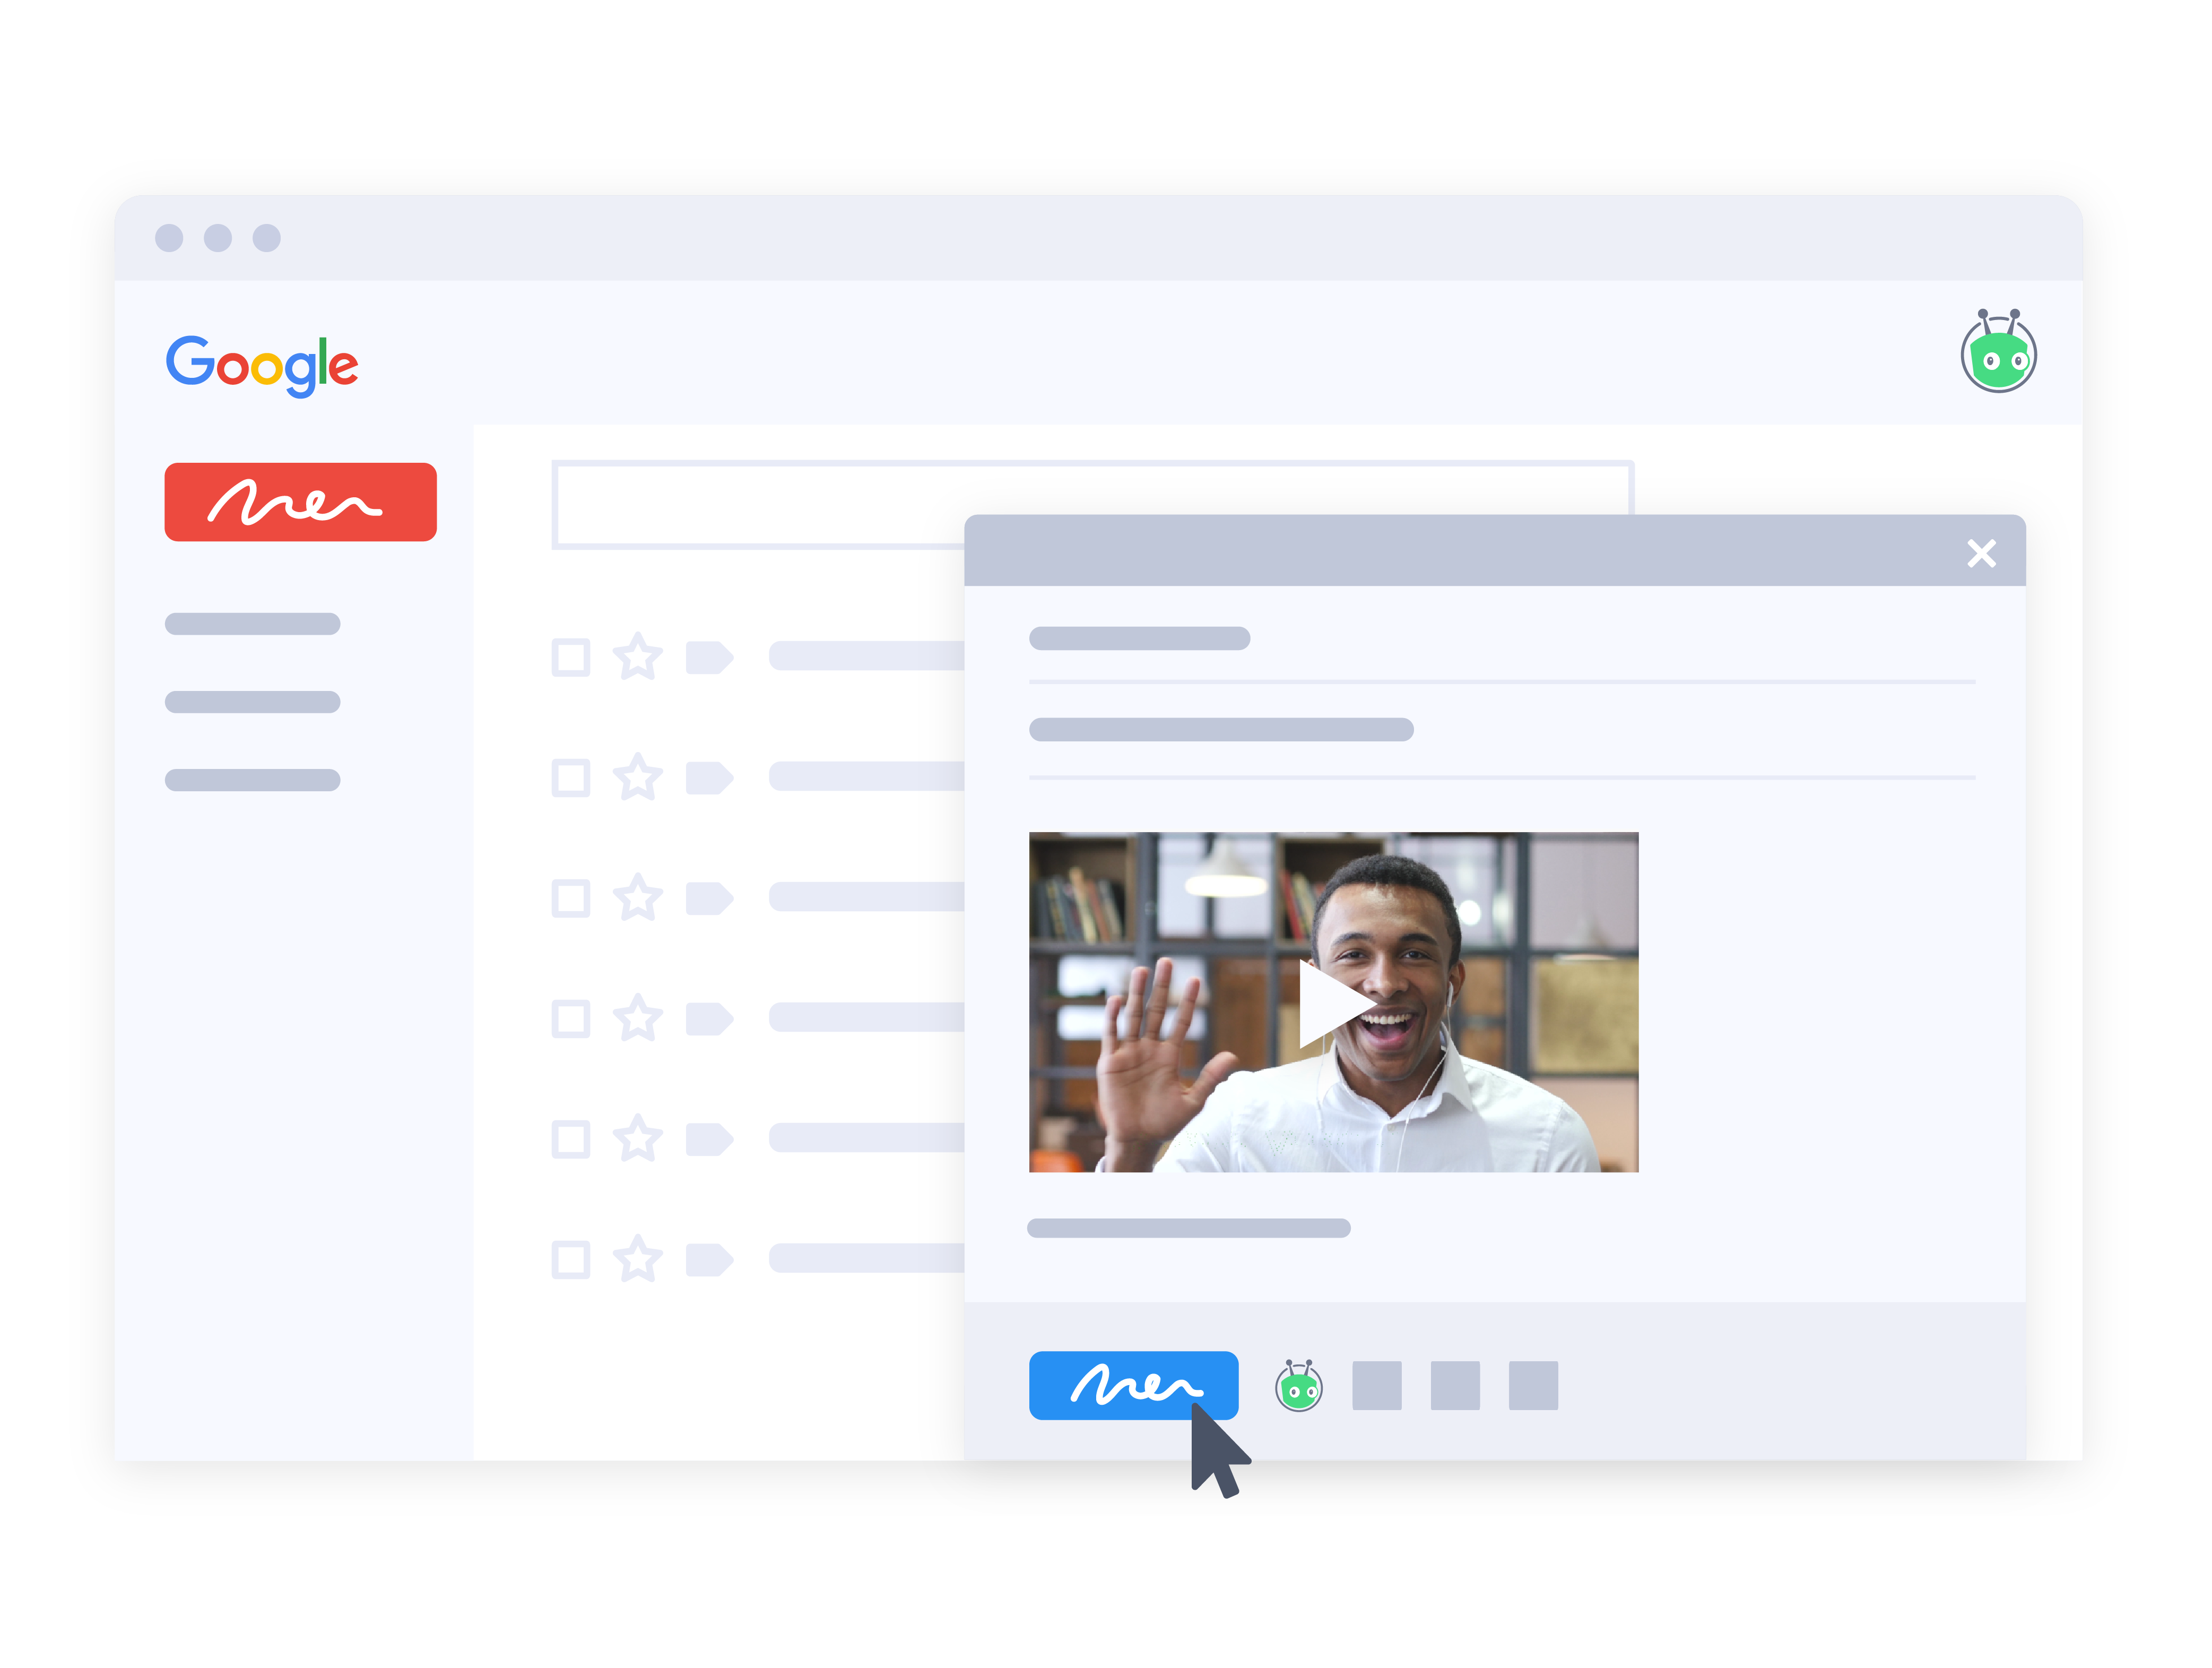 Virtual selling made easy by attaching videos for sales to messages right inside your email client.